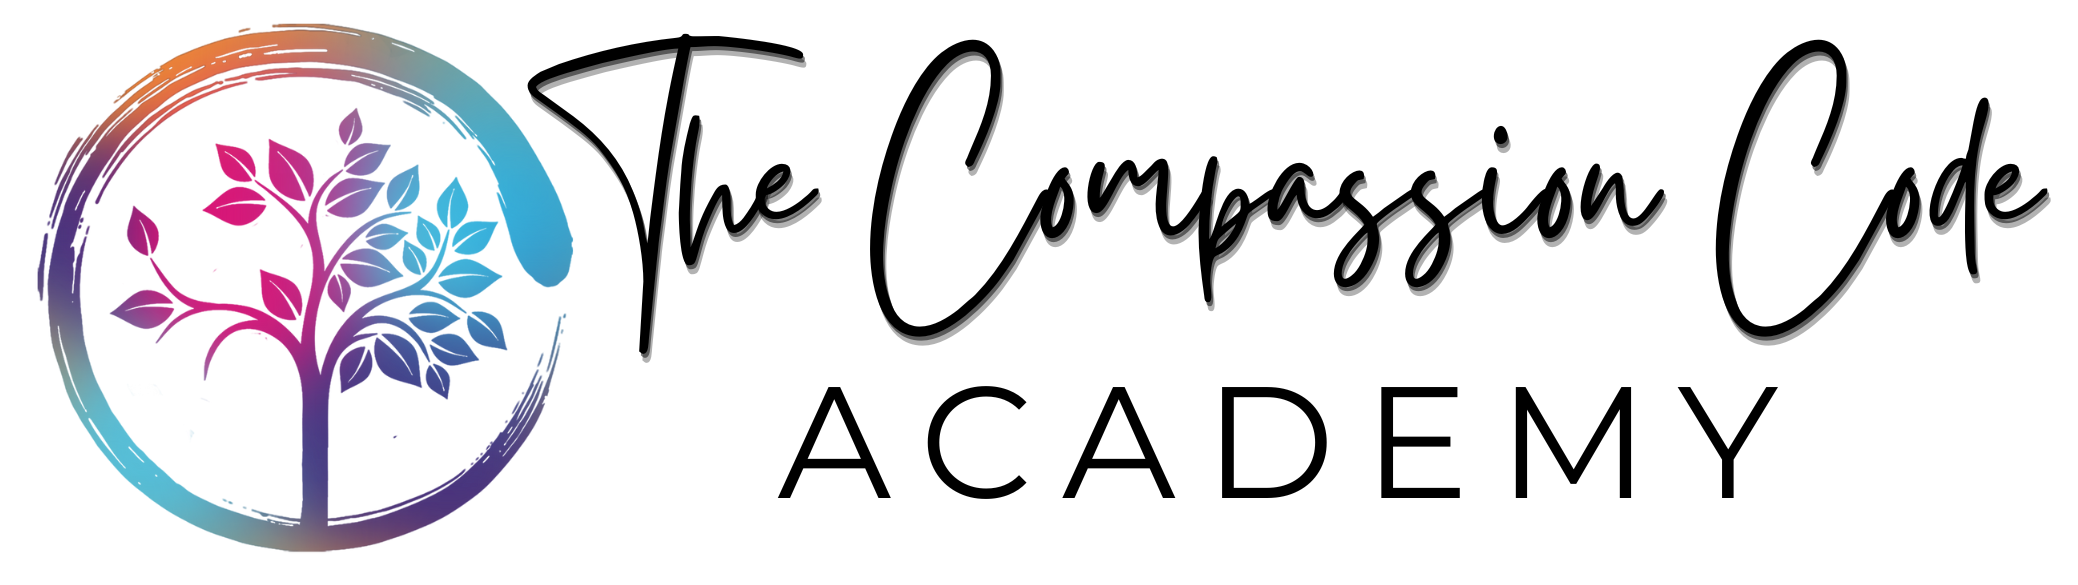 The Compassion Code Academy